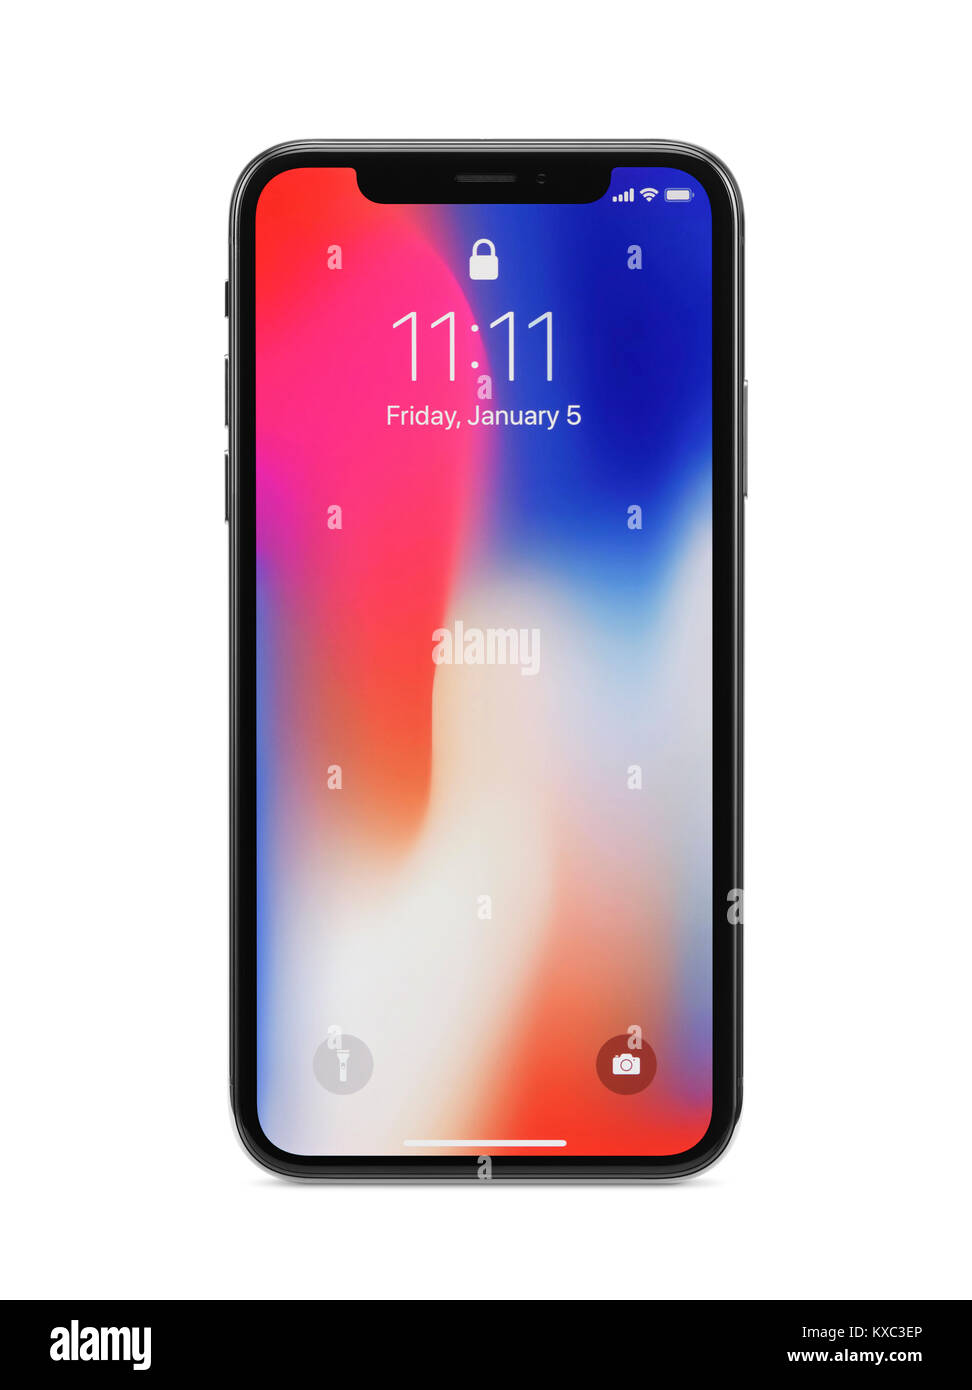 Apple iPhone X, large screen smartphone with colorful locked red blue screen. The phone is isolated on white studio background with a clipping path. Stock Photo